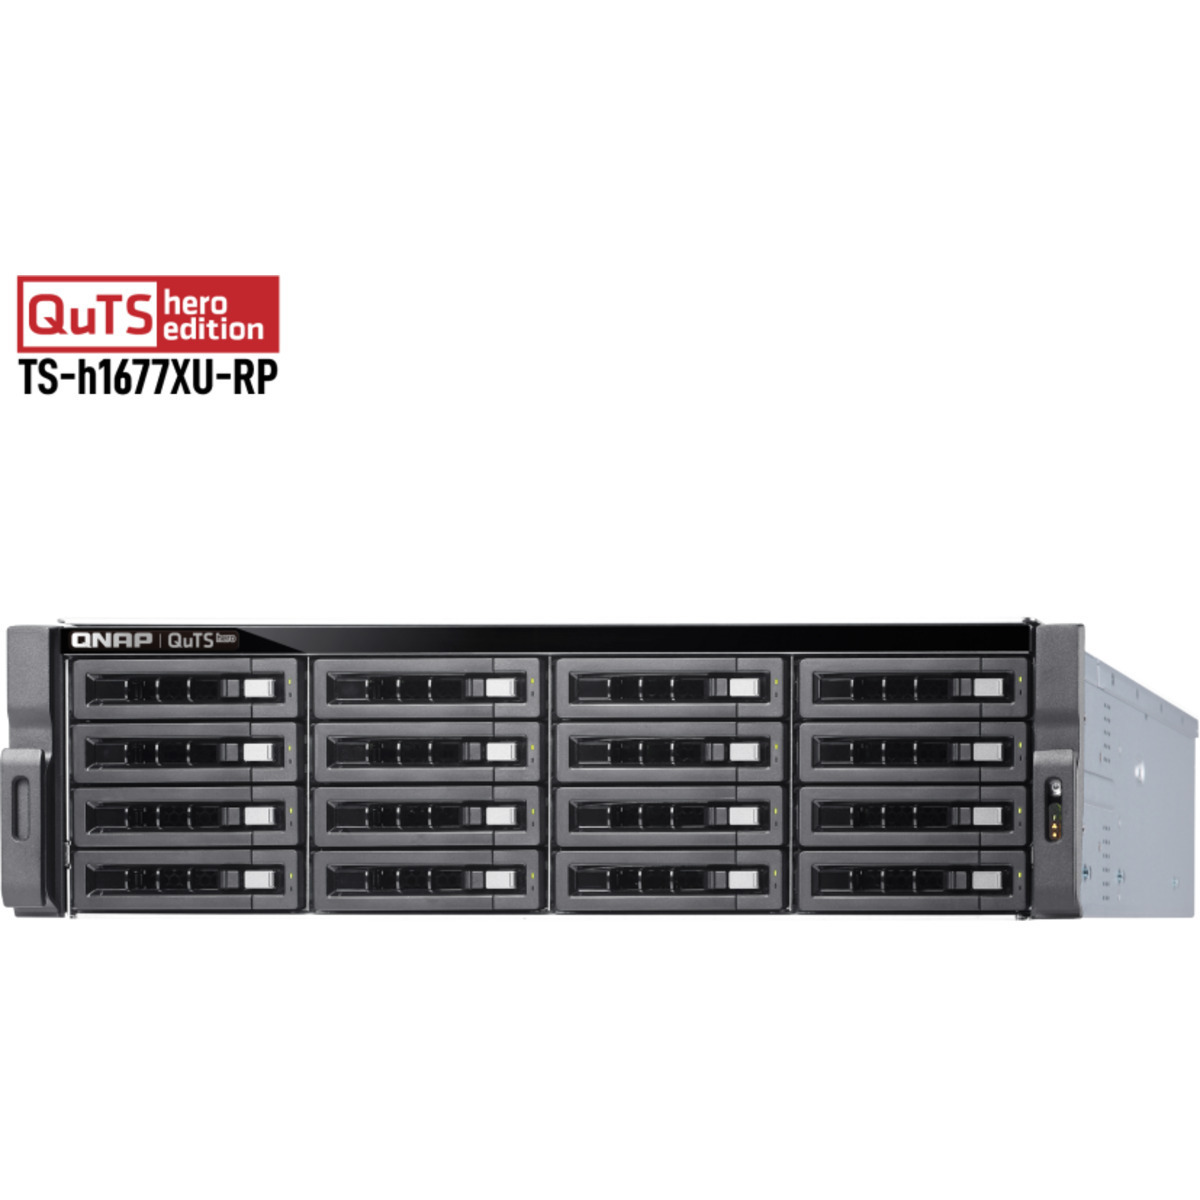 QNAP TS-h1677XU-RP NAS - Network Attached Storage Device Burn-In Tested Configurations